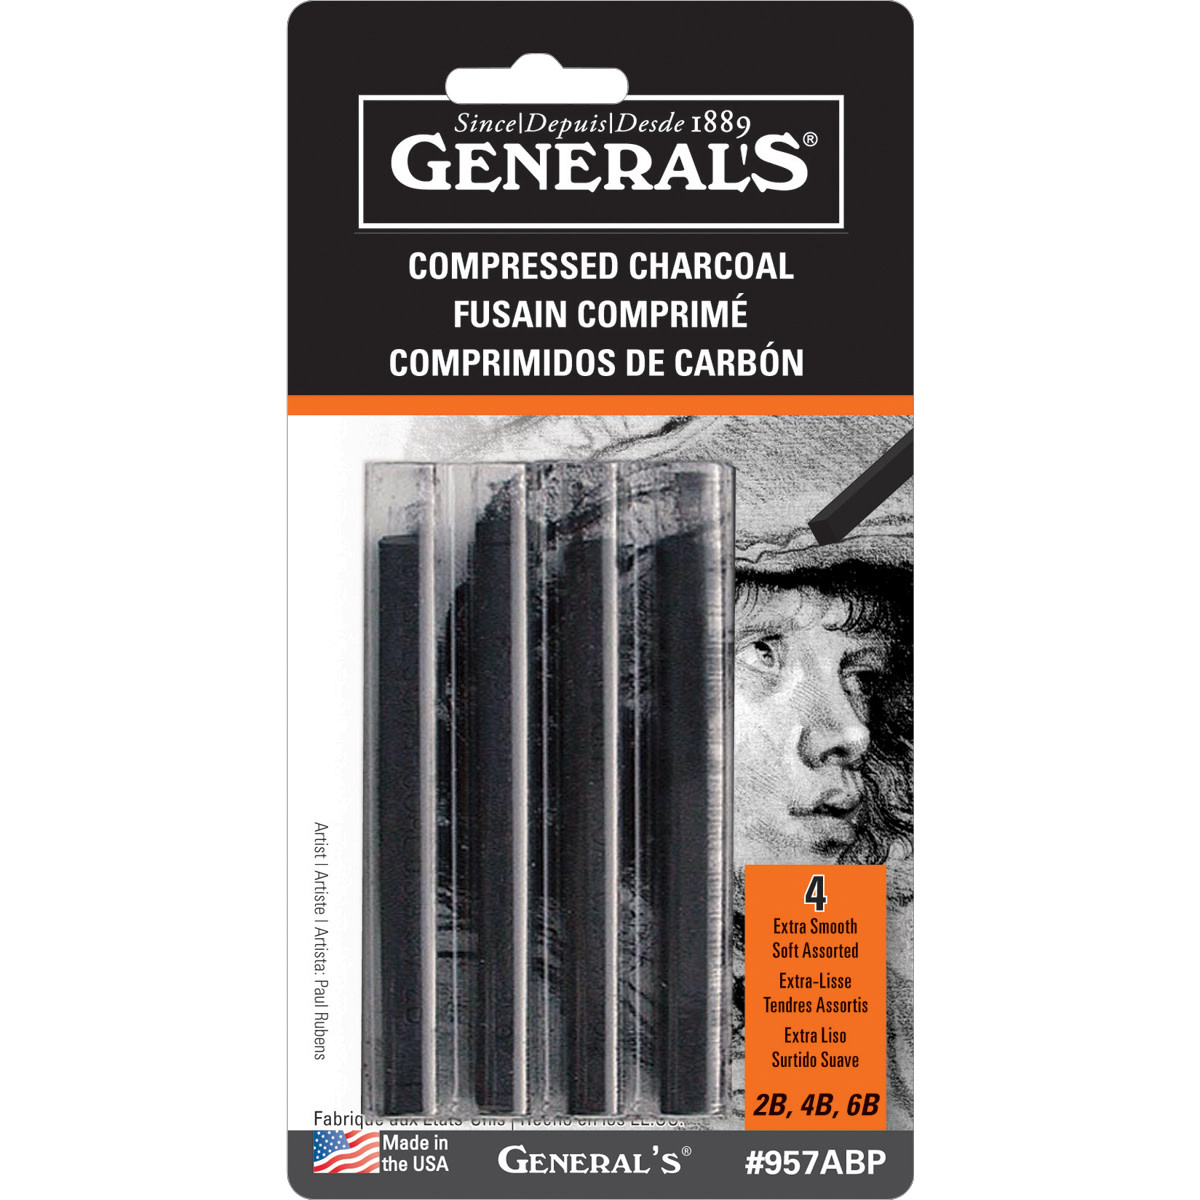 Primo Compressed Charcoal Sticks, Set of 4 – St. Louis Art Supply